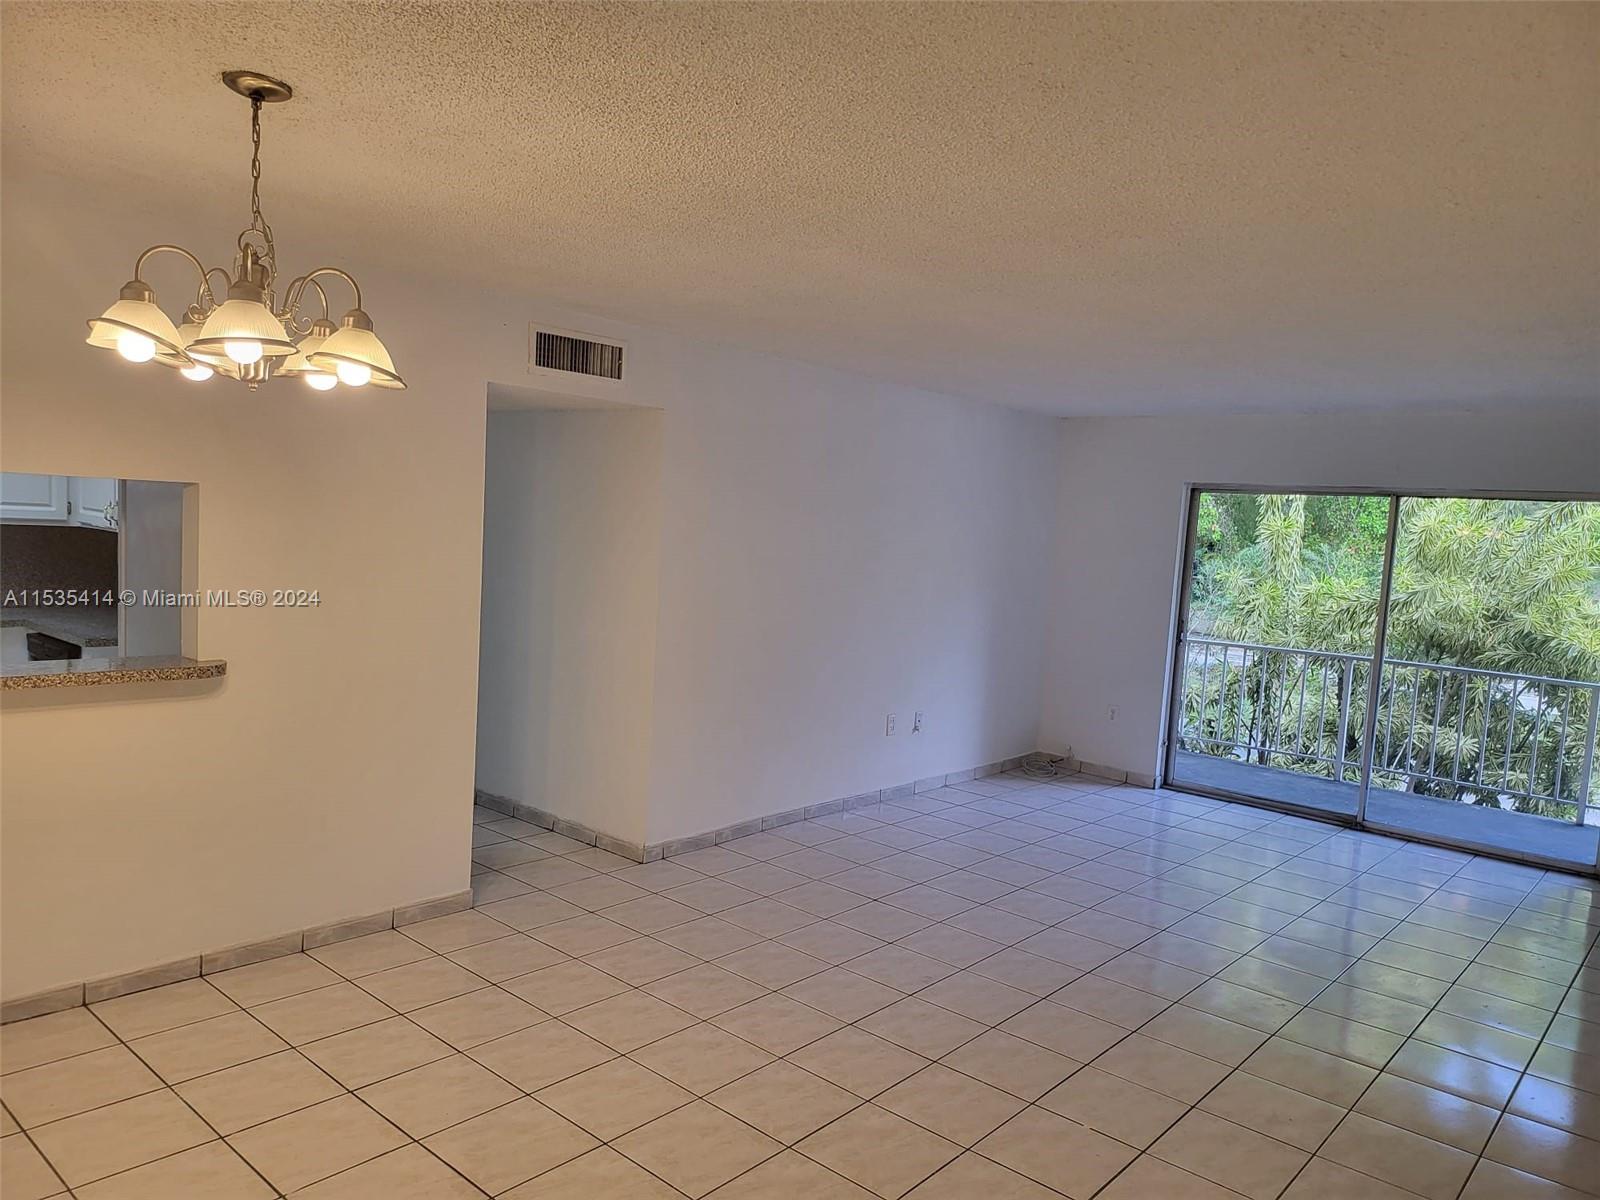 13700 SW 62nd St 207, Miami, Florida 33183, 3 Bedrooms Bedrooms, ,2 BathroomsBathrooms,Residential,For Sale,13700 SW 62nd St 207,A11535414